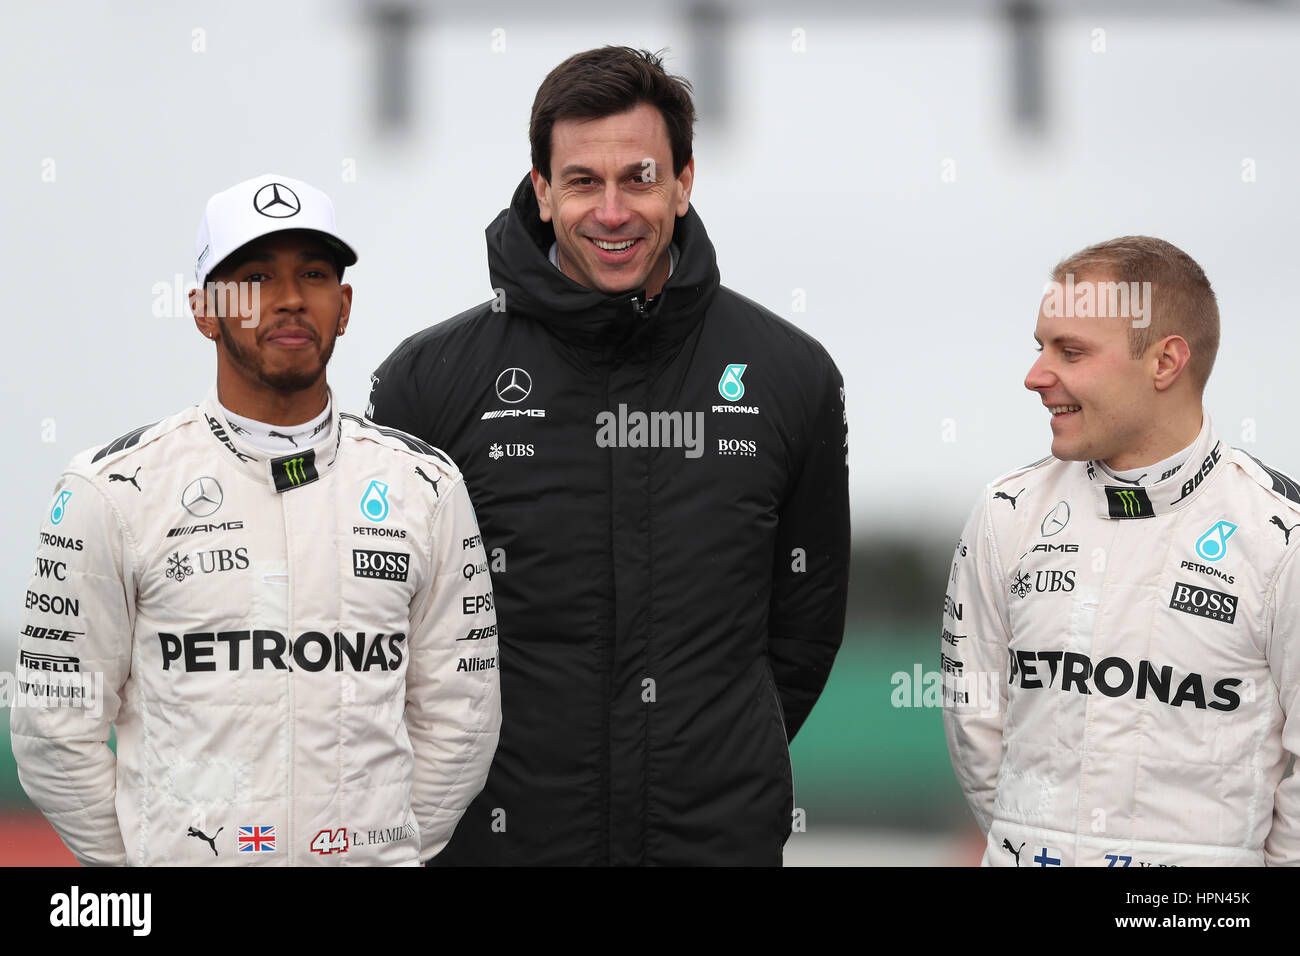 (From left to right) Lewis Hamilton, team principal Toto Wolff and Valtteri Bottas during the Mercedes-AMG 2017 Car Launch at Silverstone, Towcester. Stock Photo